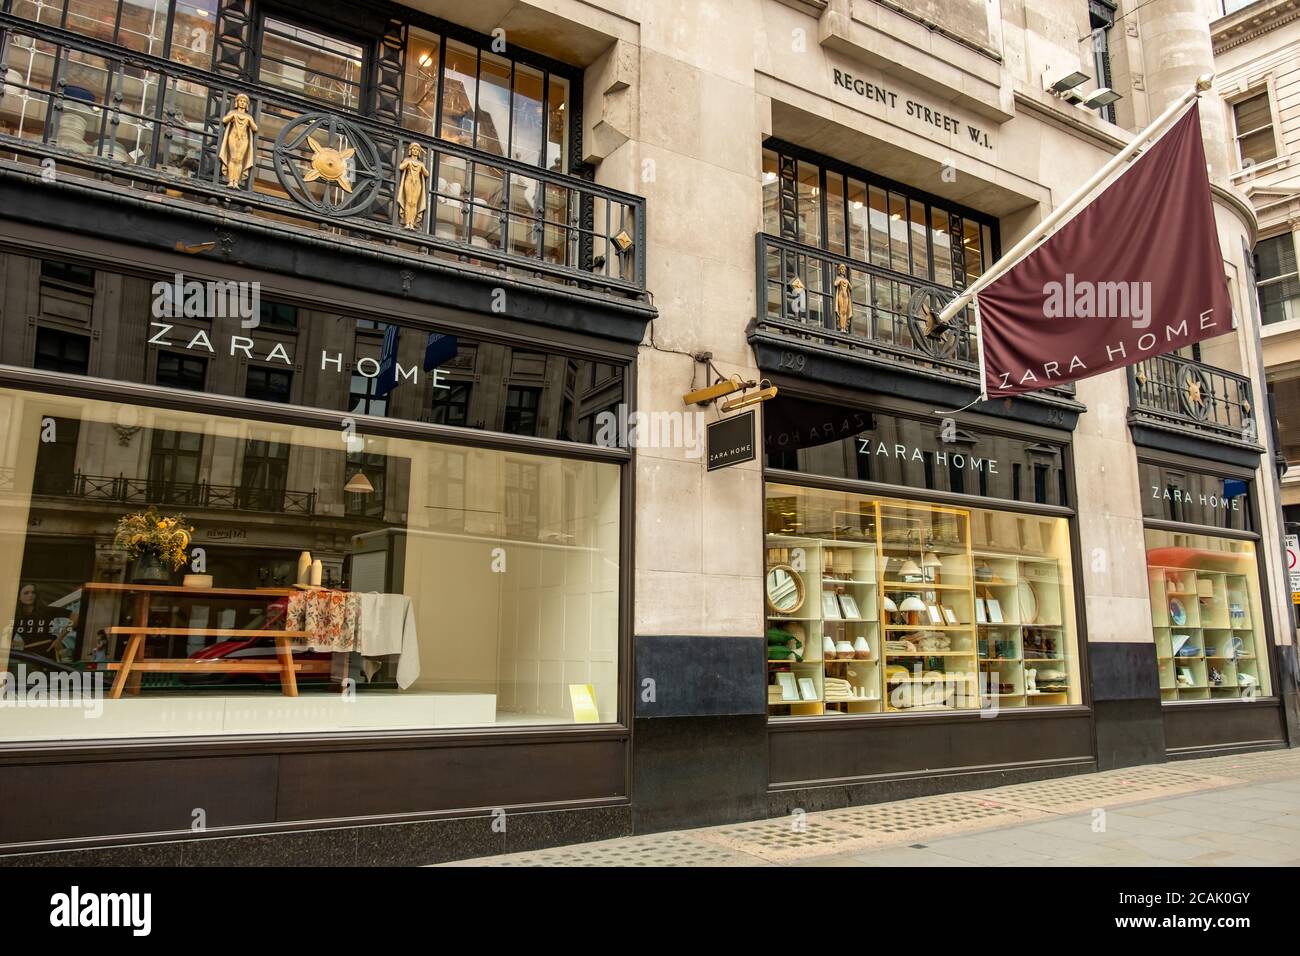 London- Zara Home retail store signage in London's West End Stock Photo -  Alamy